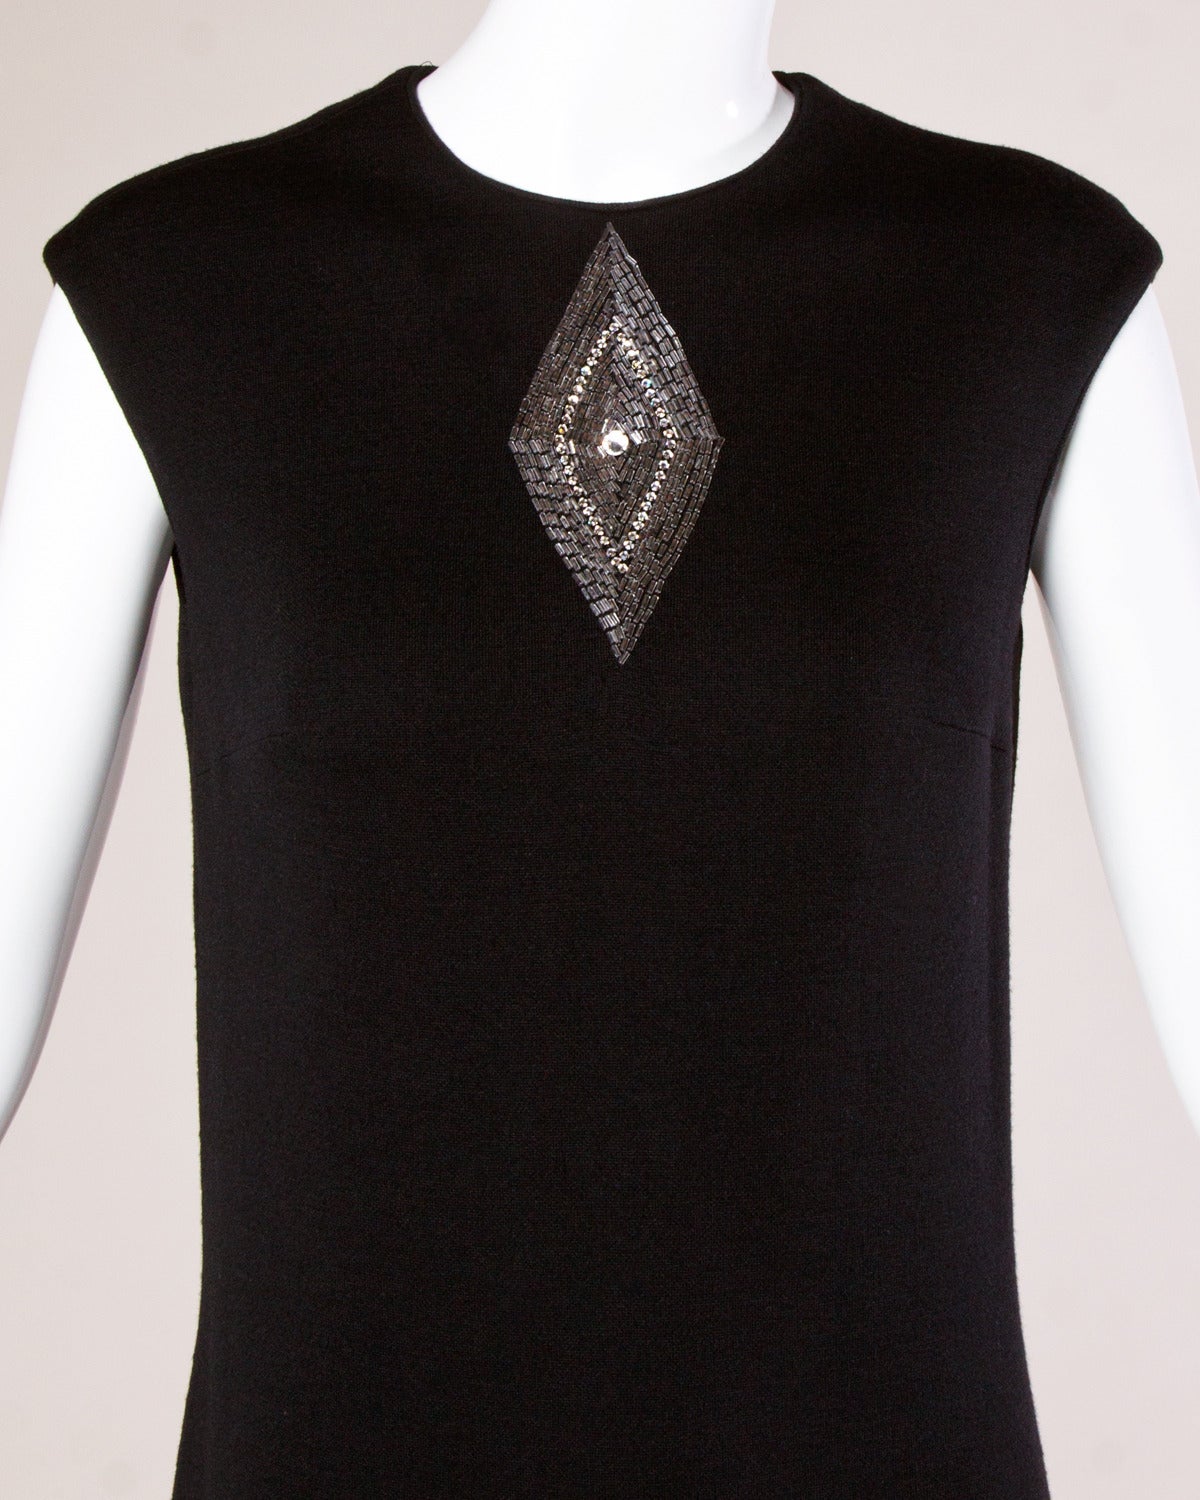 Mr. Blackwell black wool shift dress with mod beaded and rhinestone embellished diamond design. Bow detail at the back of the neck.

Details:

Fully Lined
Back Zip and Hook Closure
Marked Size: Not Marked
Estimated Size: Small
Color: Black/